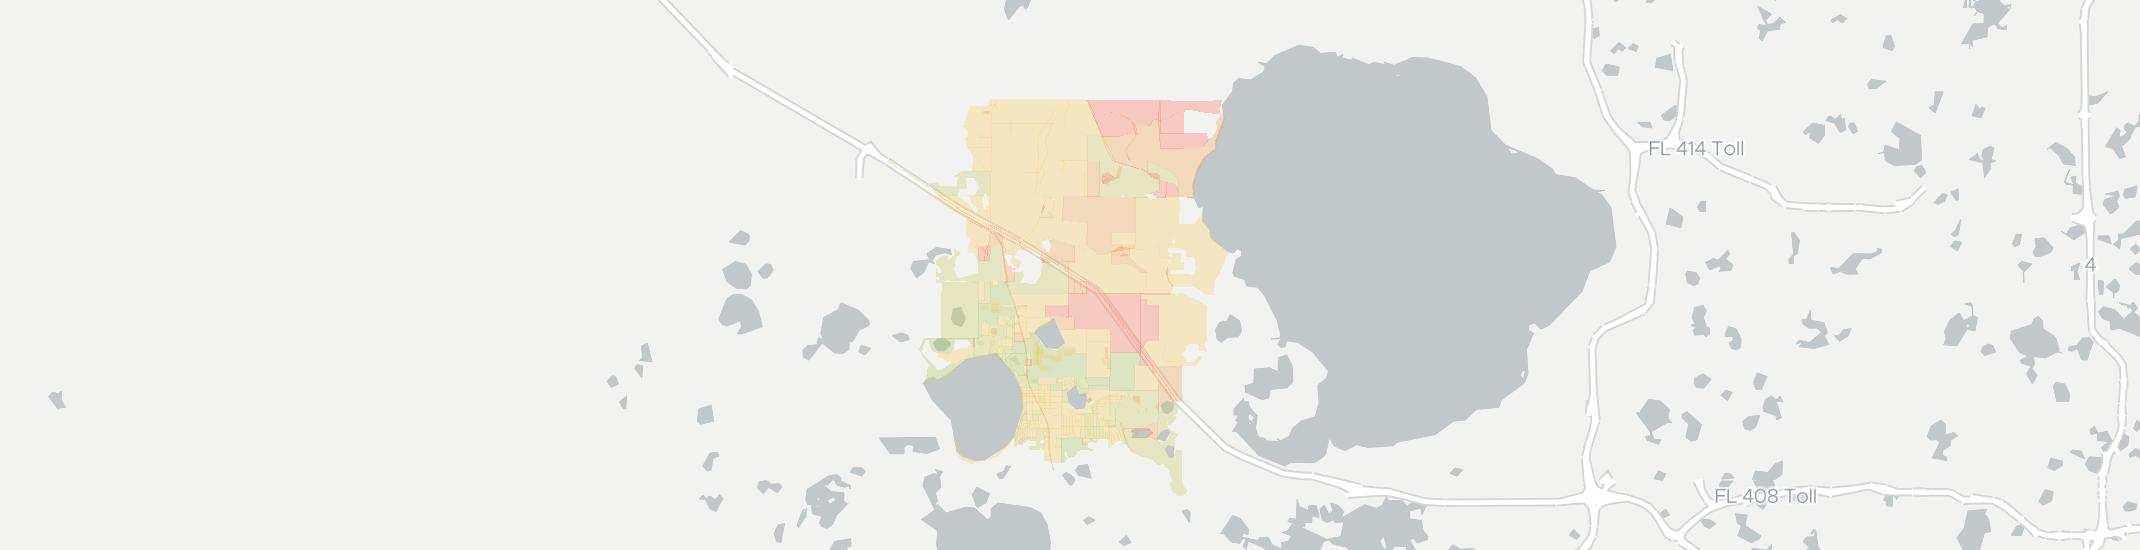 Minneola Internet Competition Map. Click for interactive map.